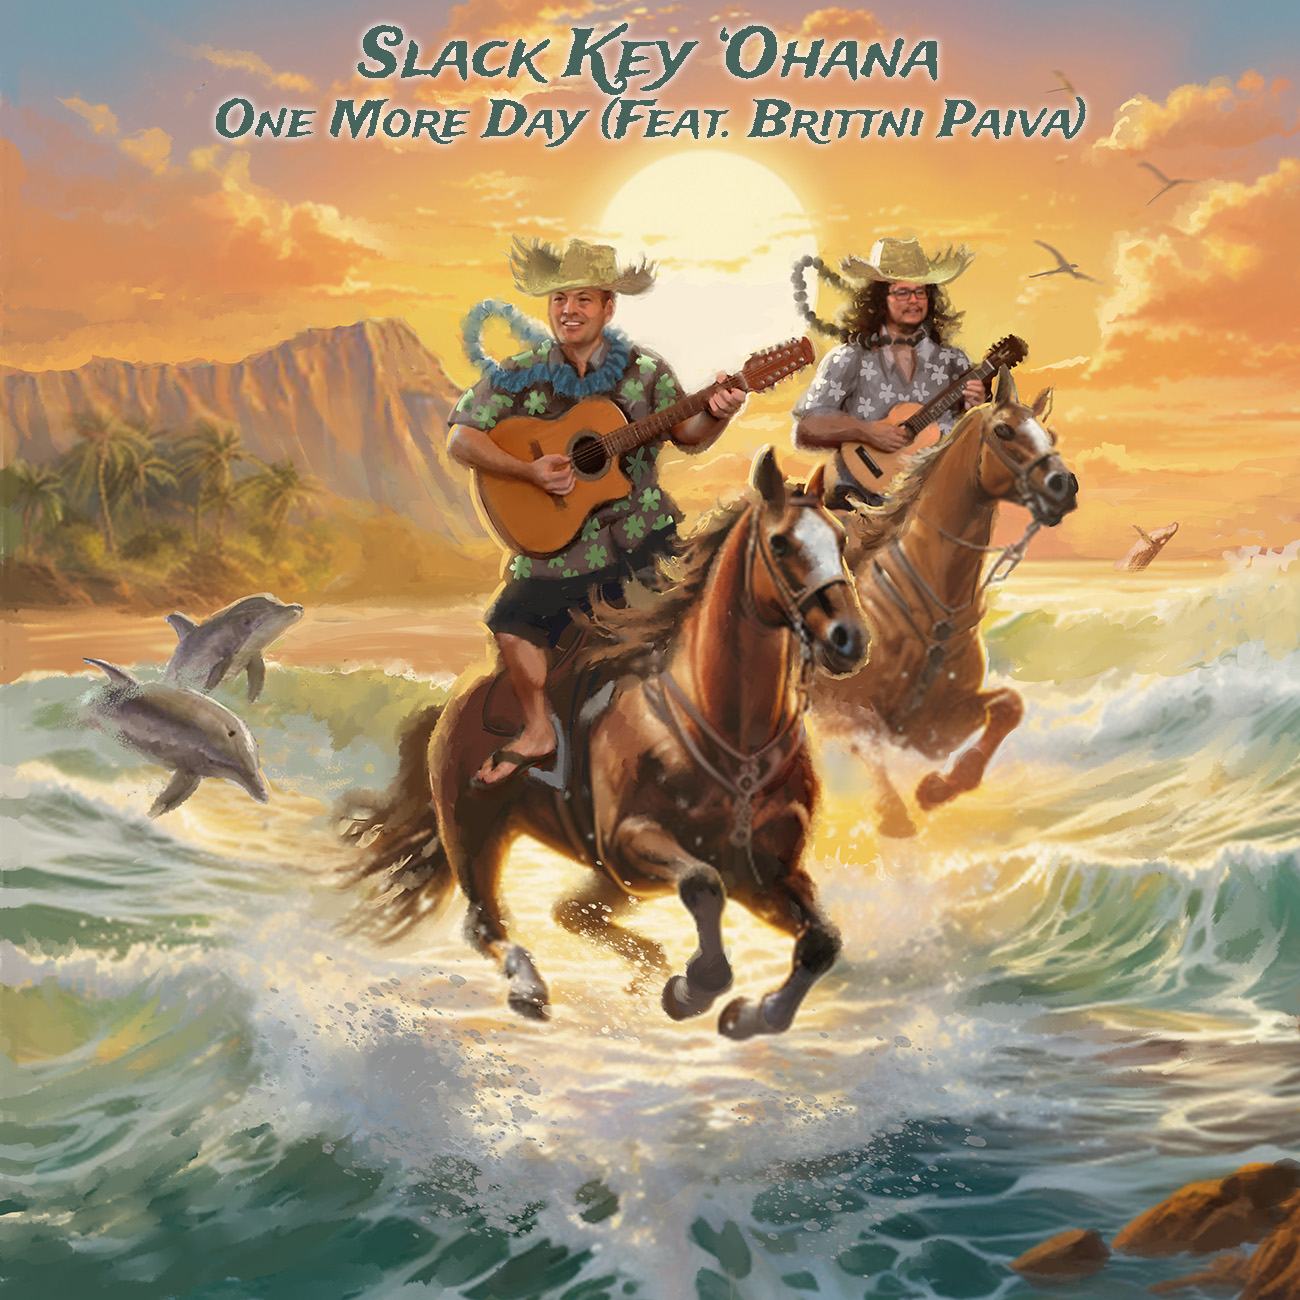 Art for One More Day (Featuring Brittni Paiva) by Slack Key 'Ohana